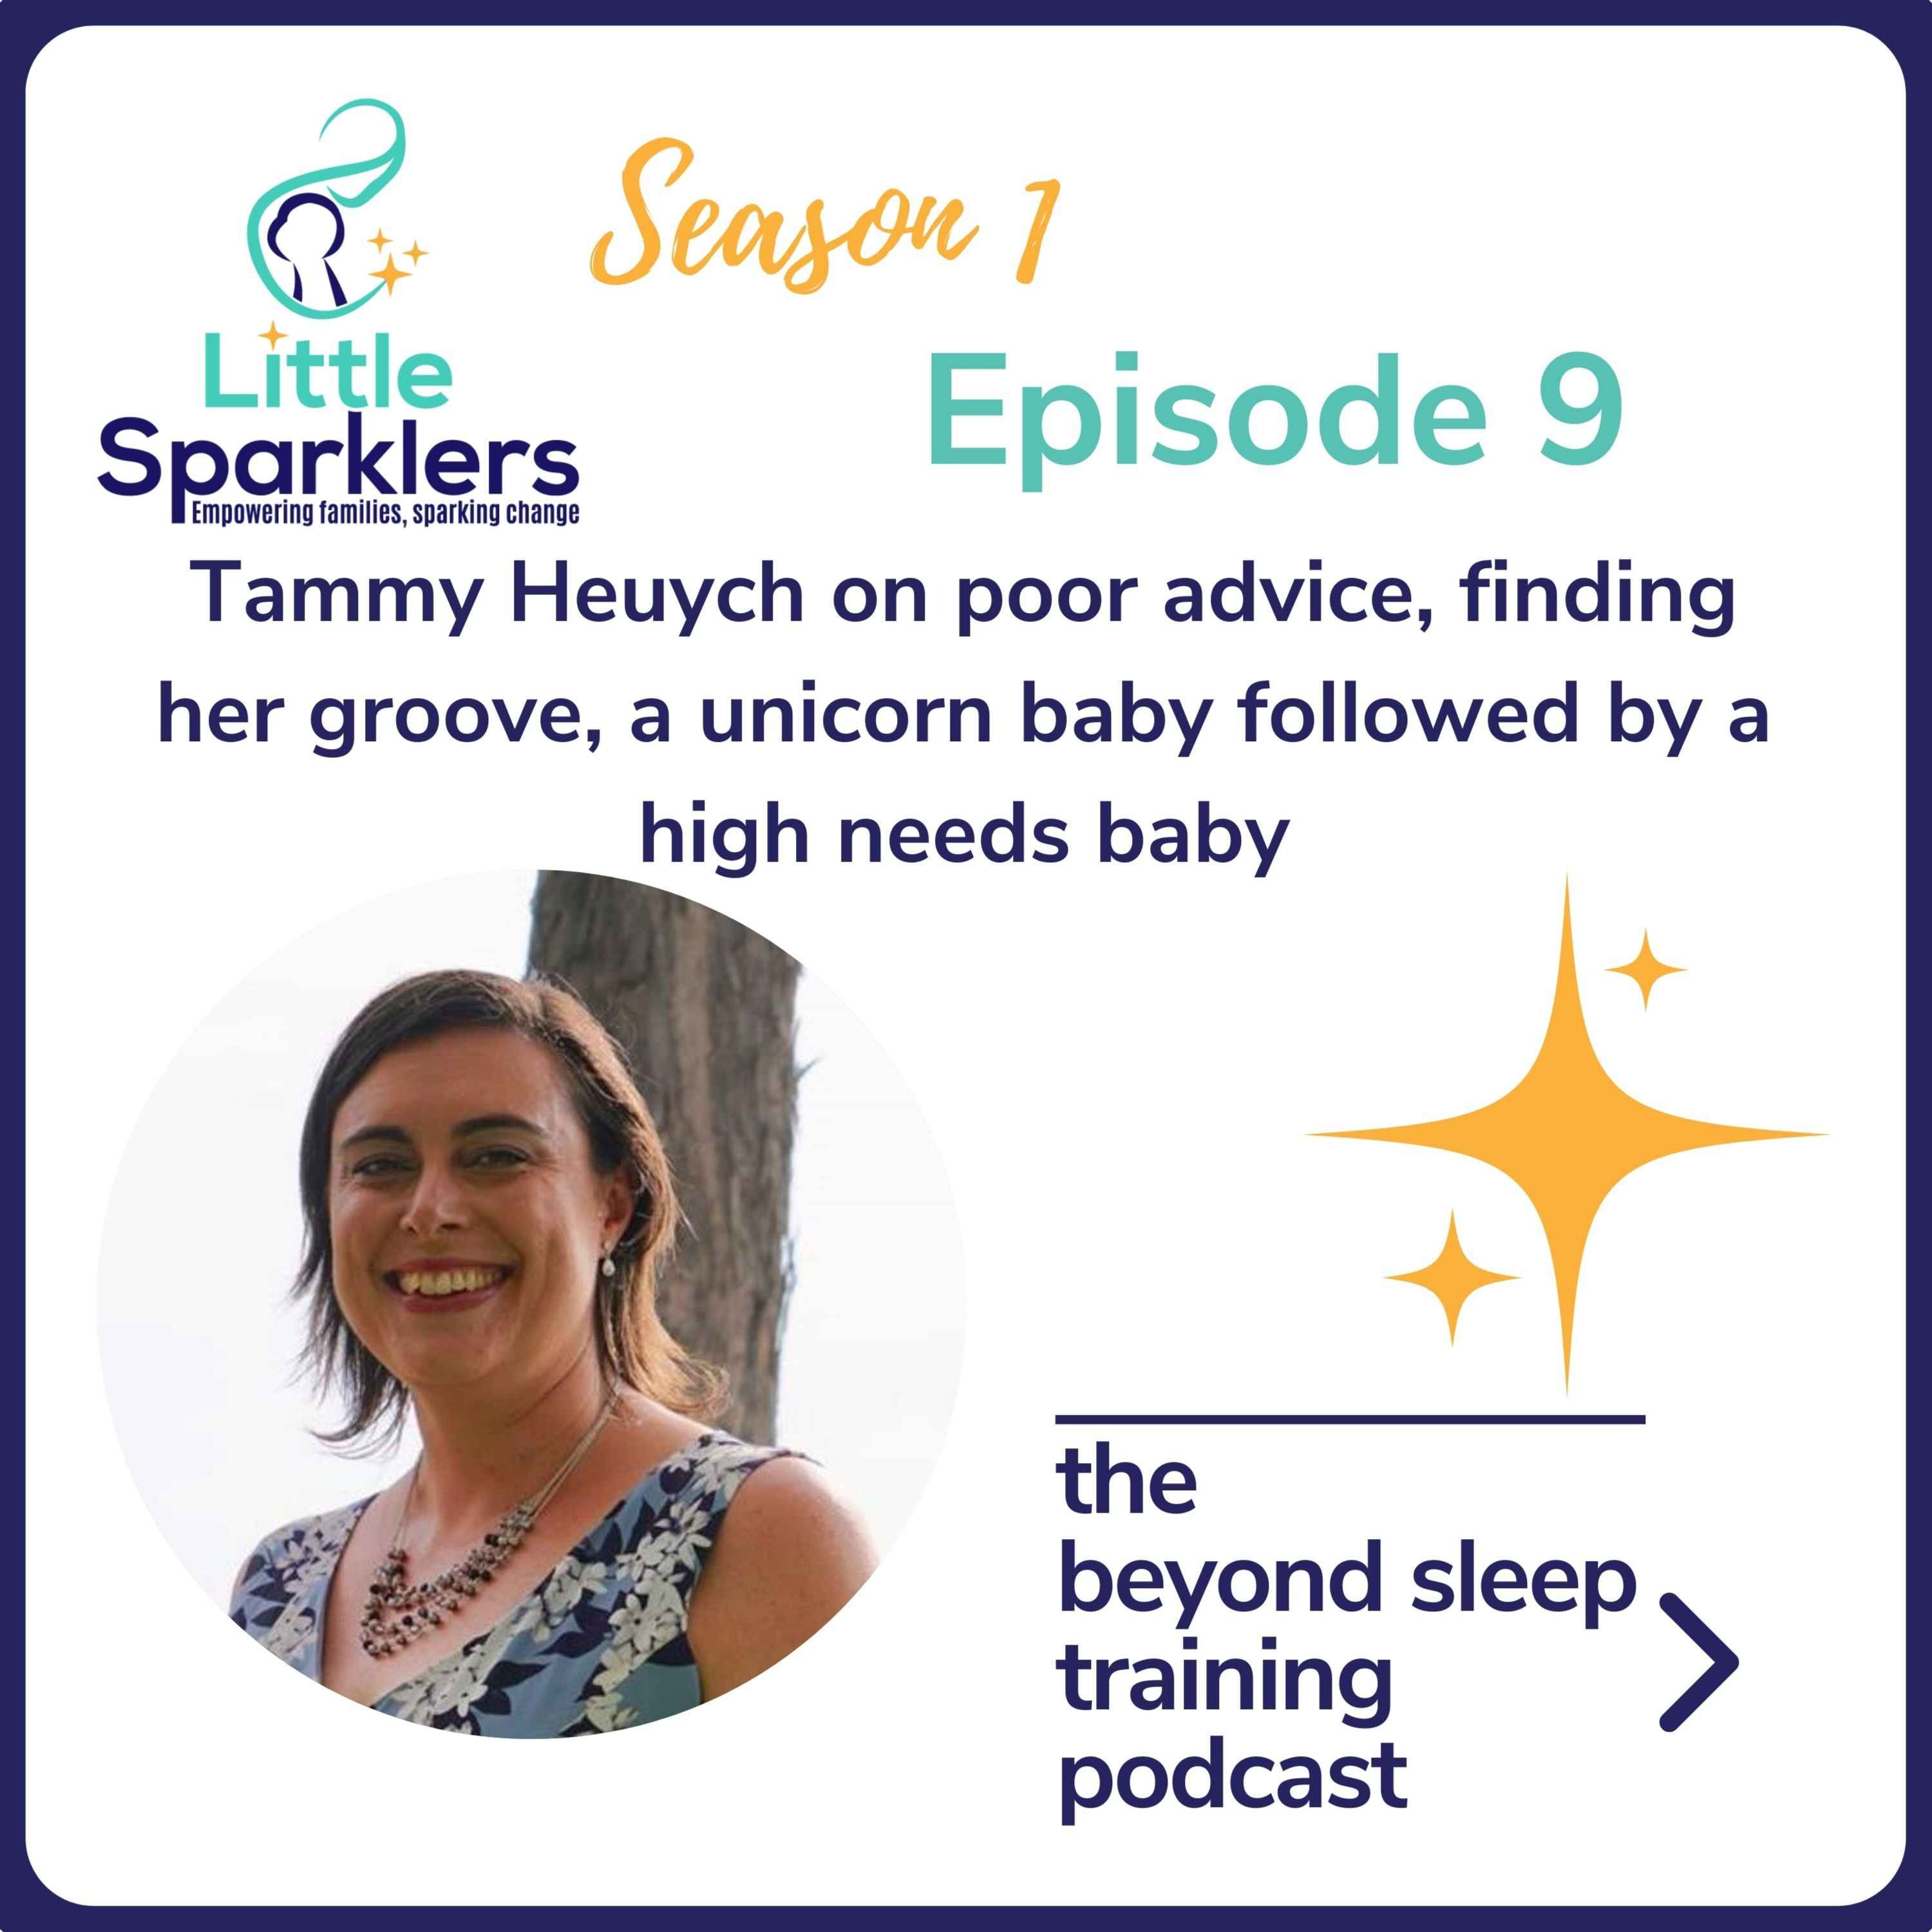 Tammy Heuych's story of her parenting journey with three little ones, and the importance of honest conversations with your support network